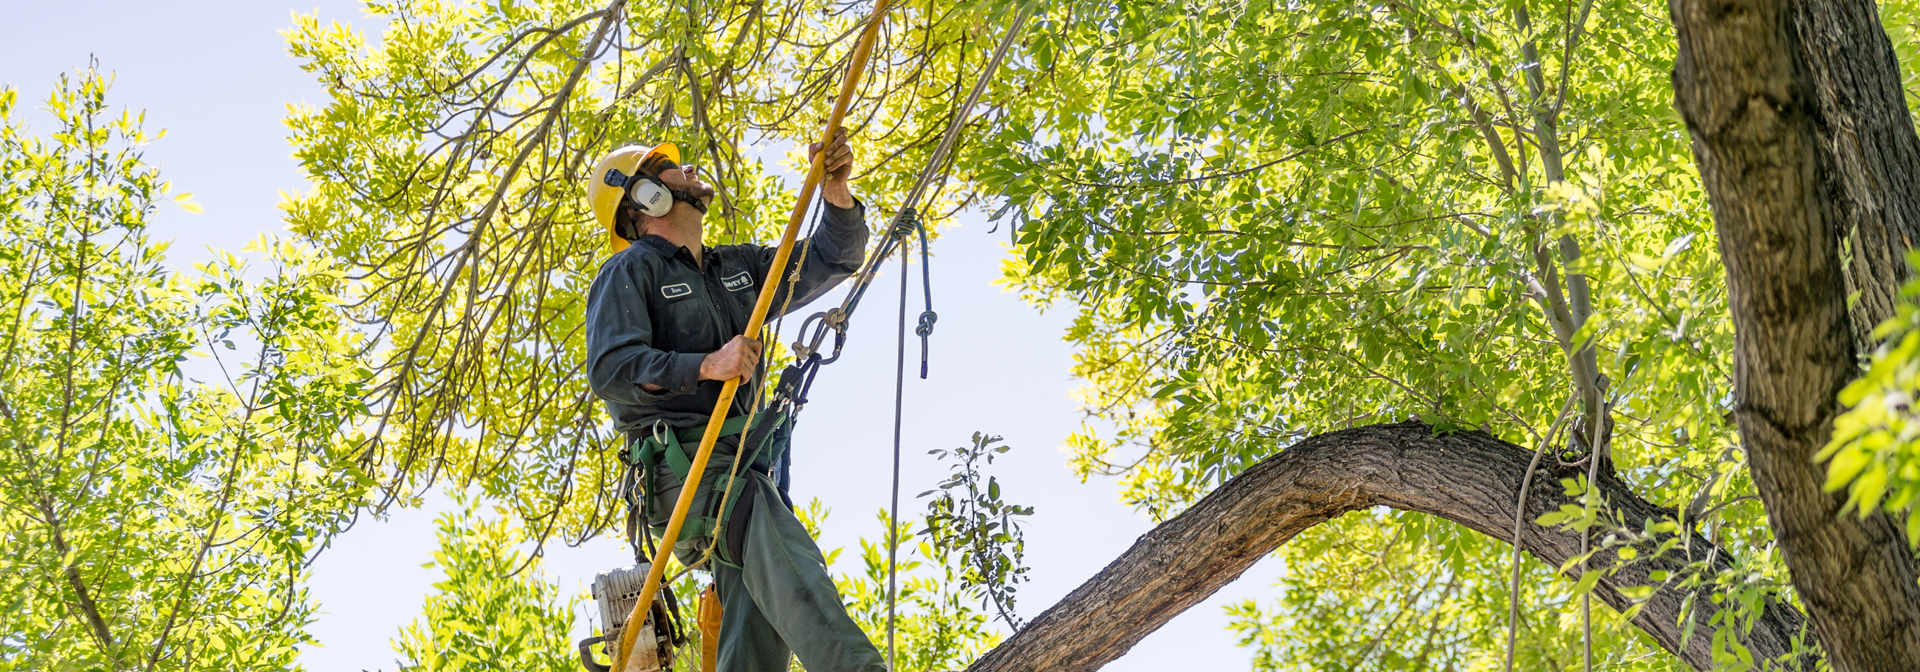 Commercial Tree Pruning